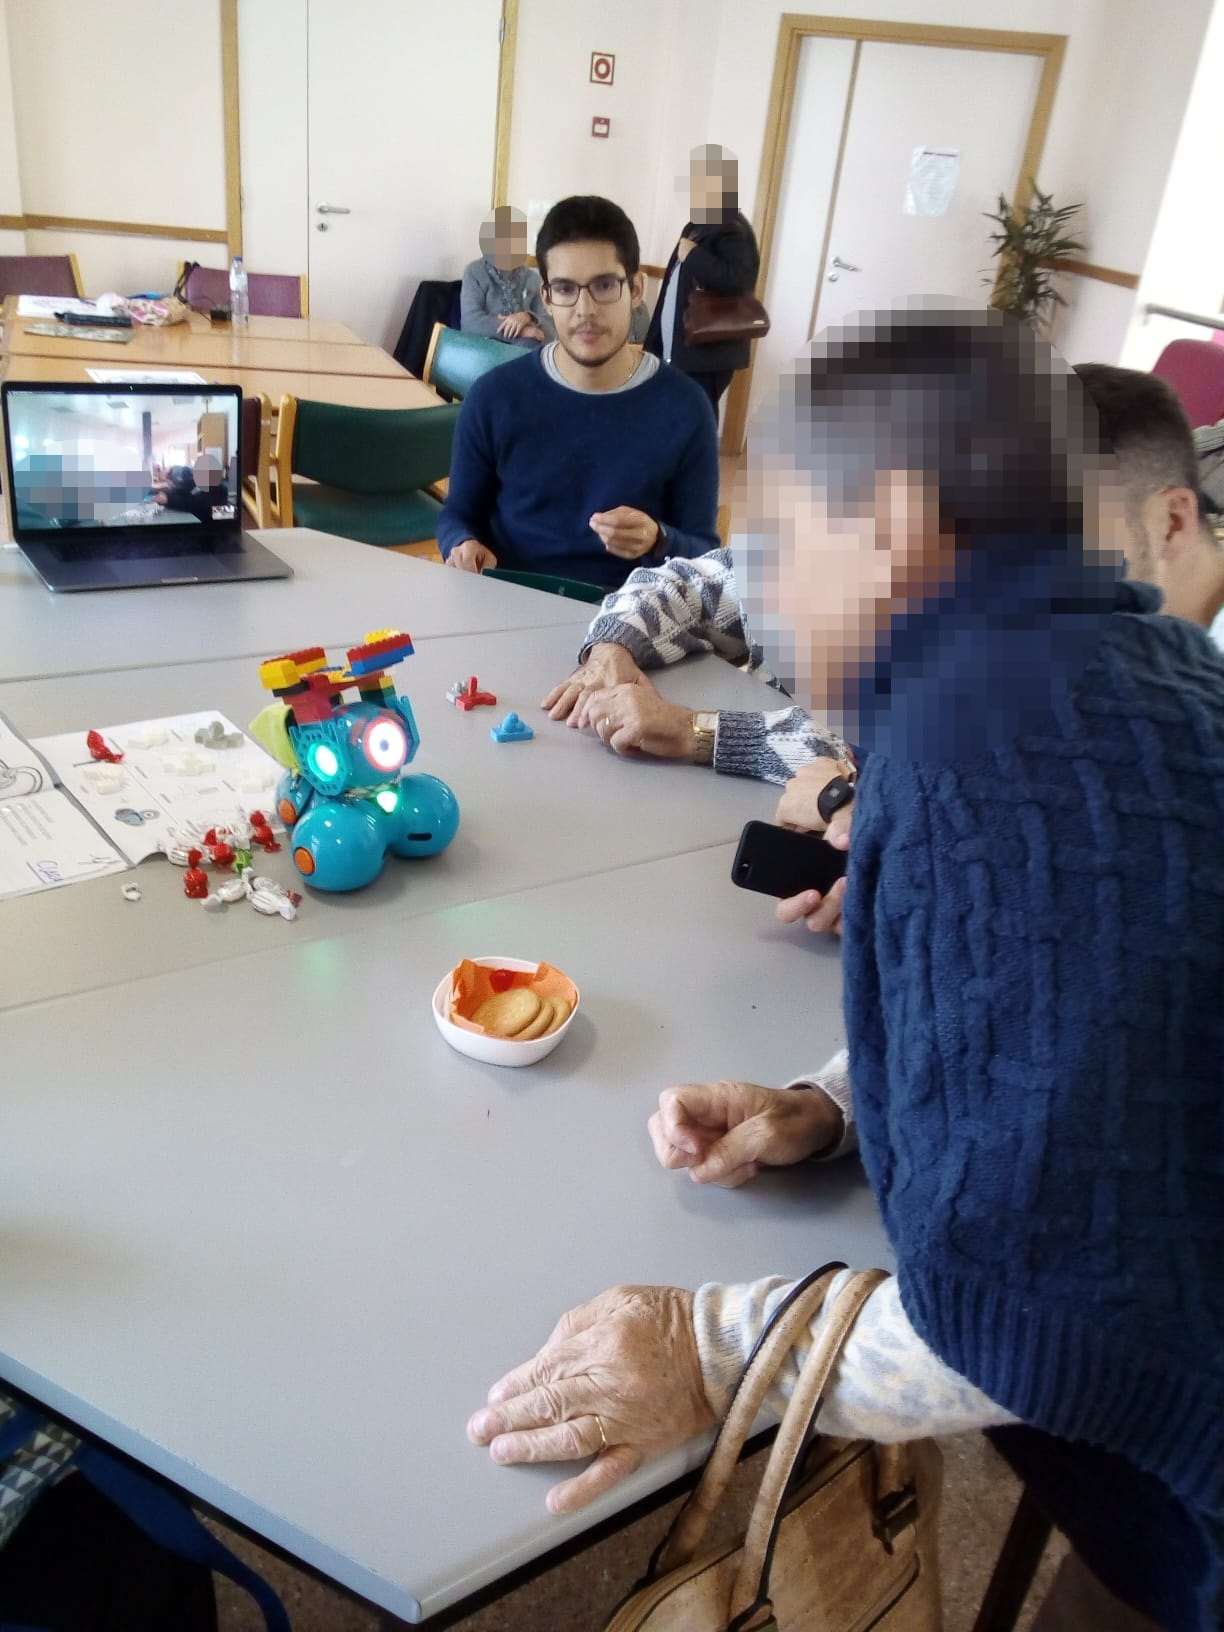 Photo taken from the Workshop with elderly people. Two people are interacting with the carrier robot